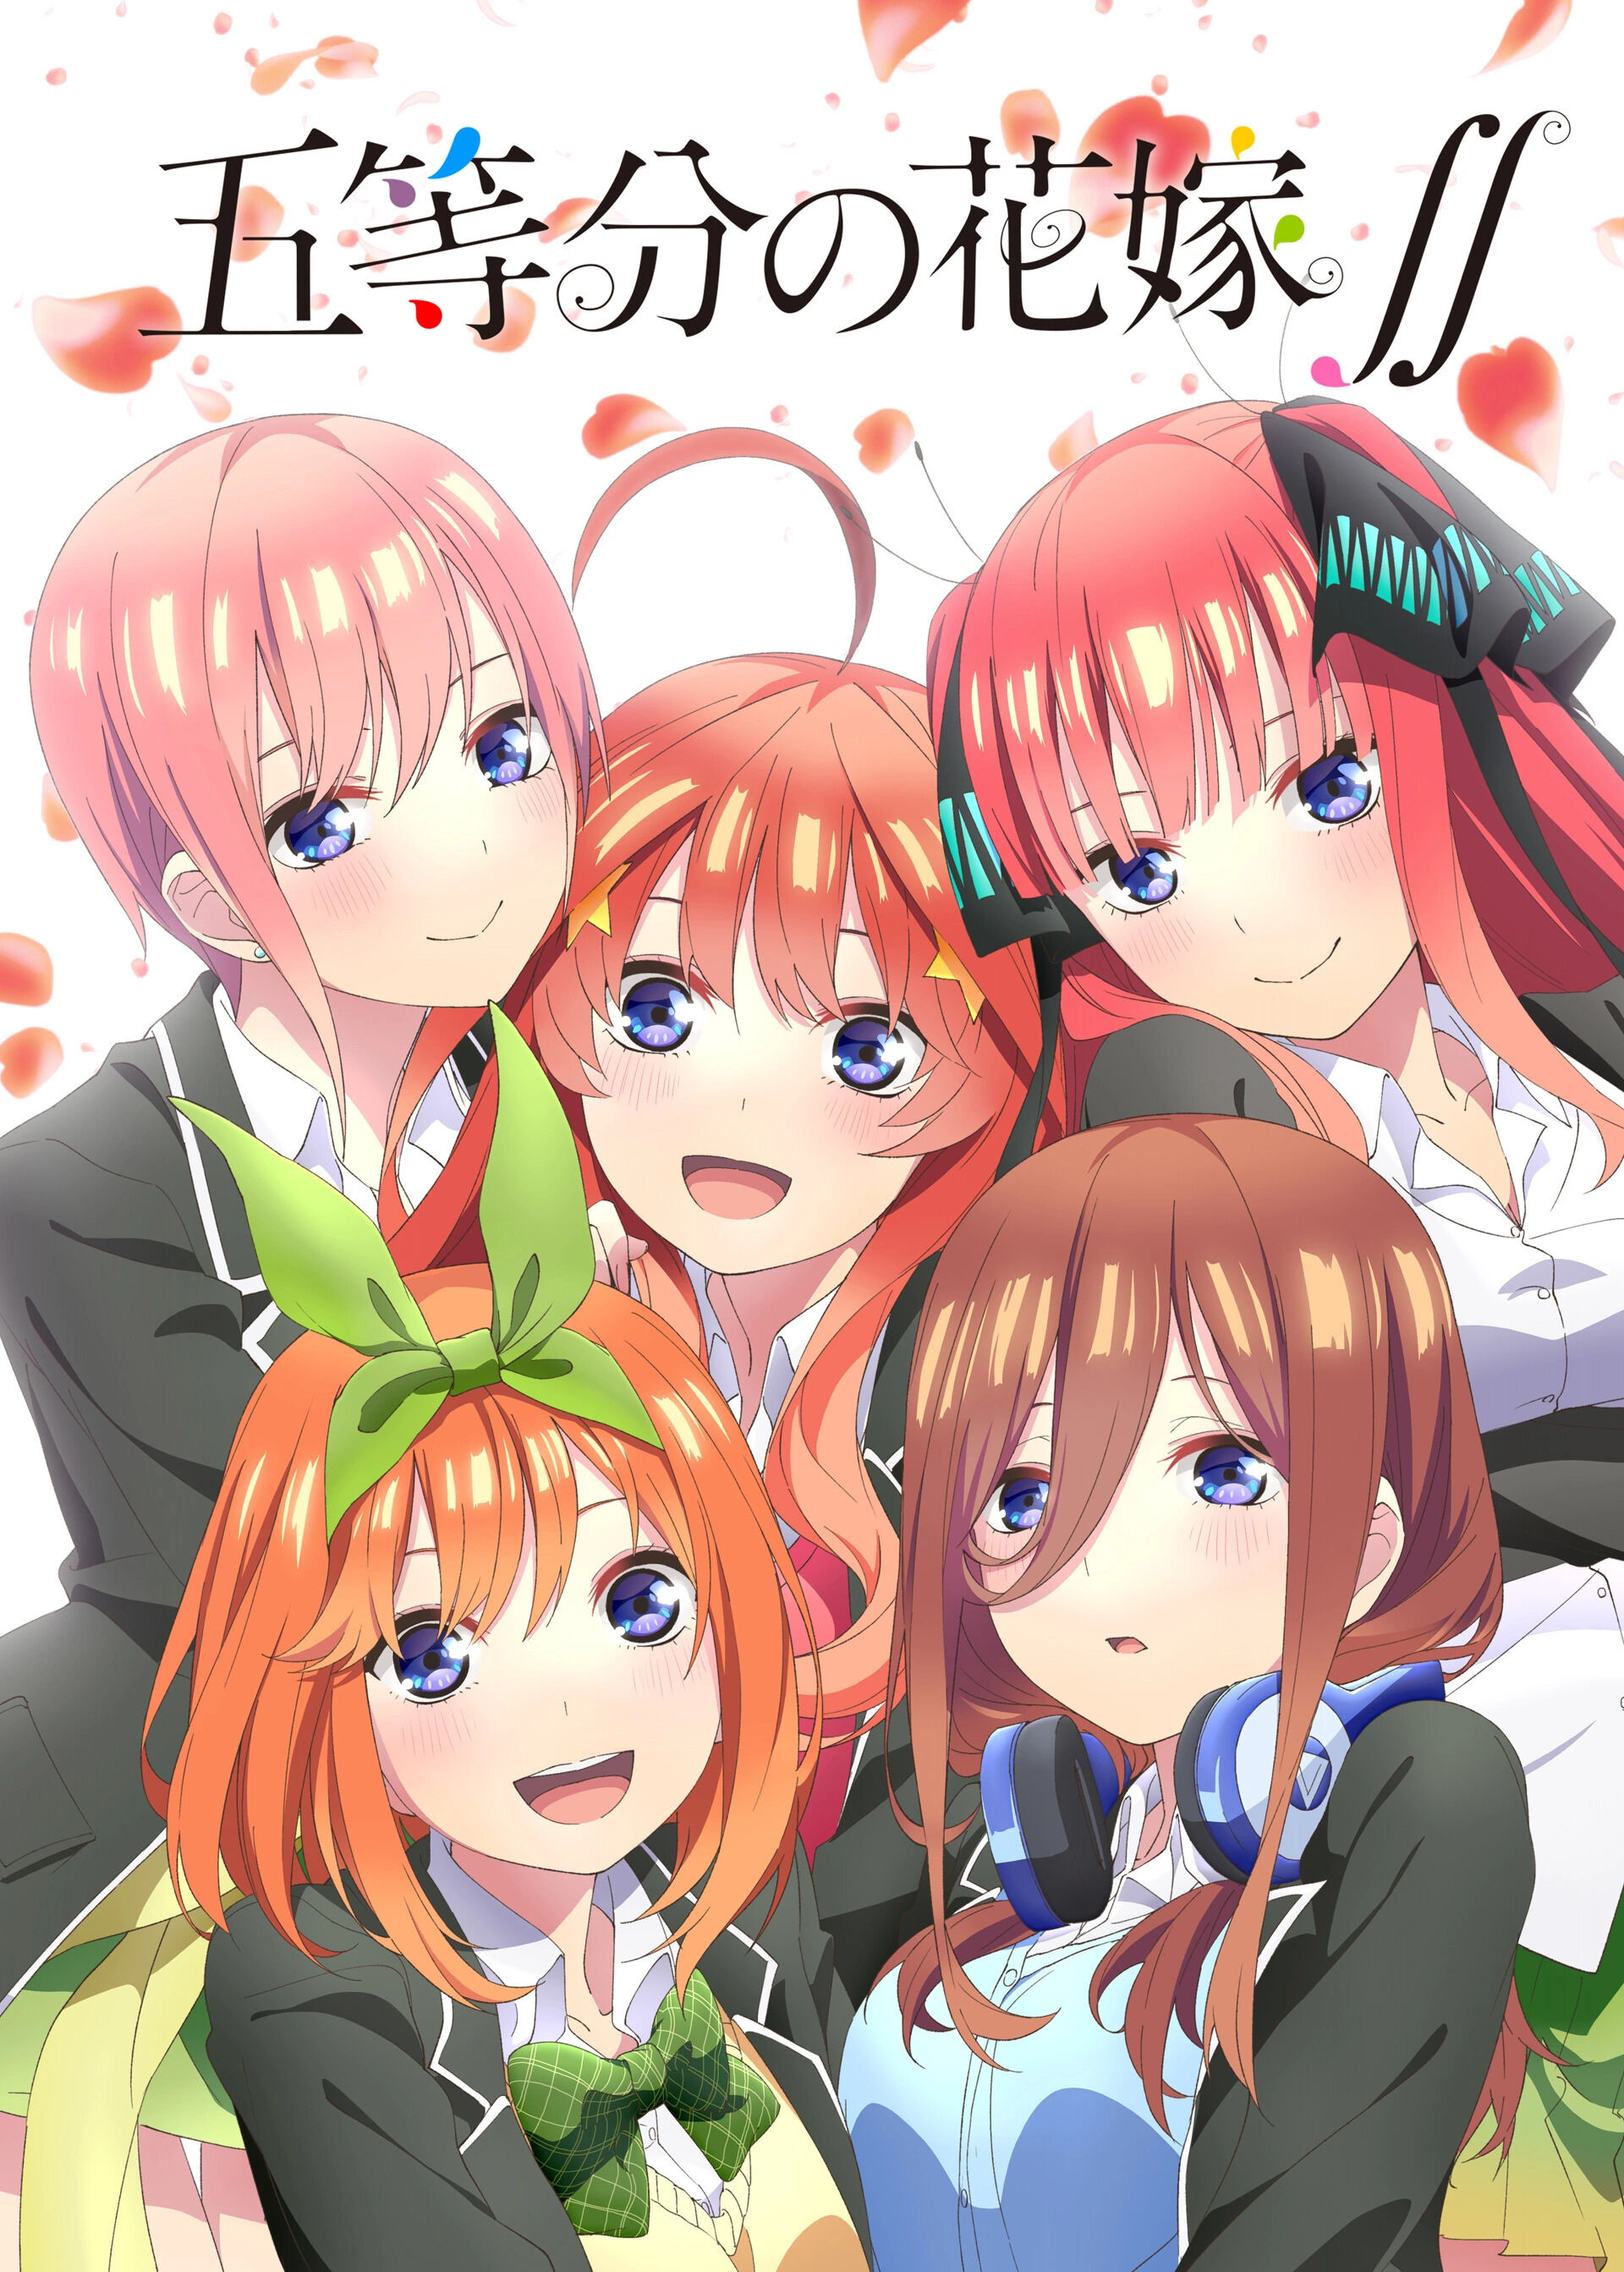 The 13 Best Anime Like The Quintessential Quintuplets